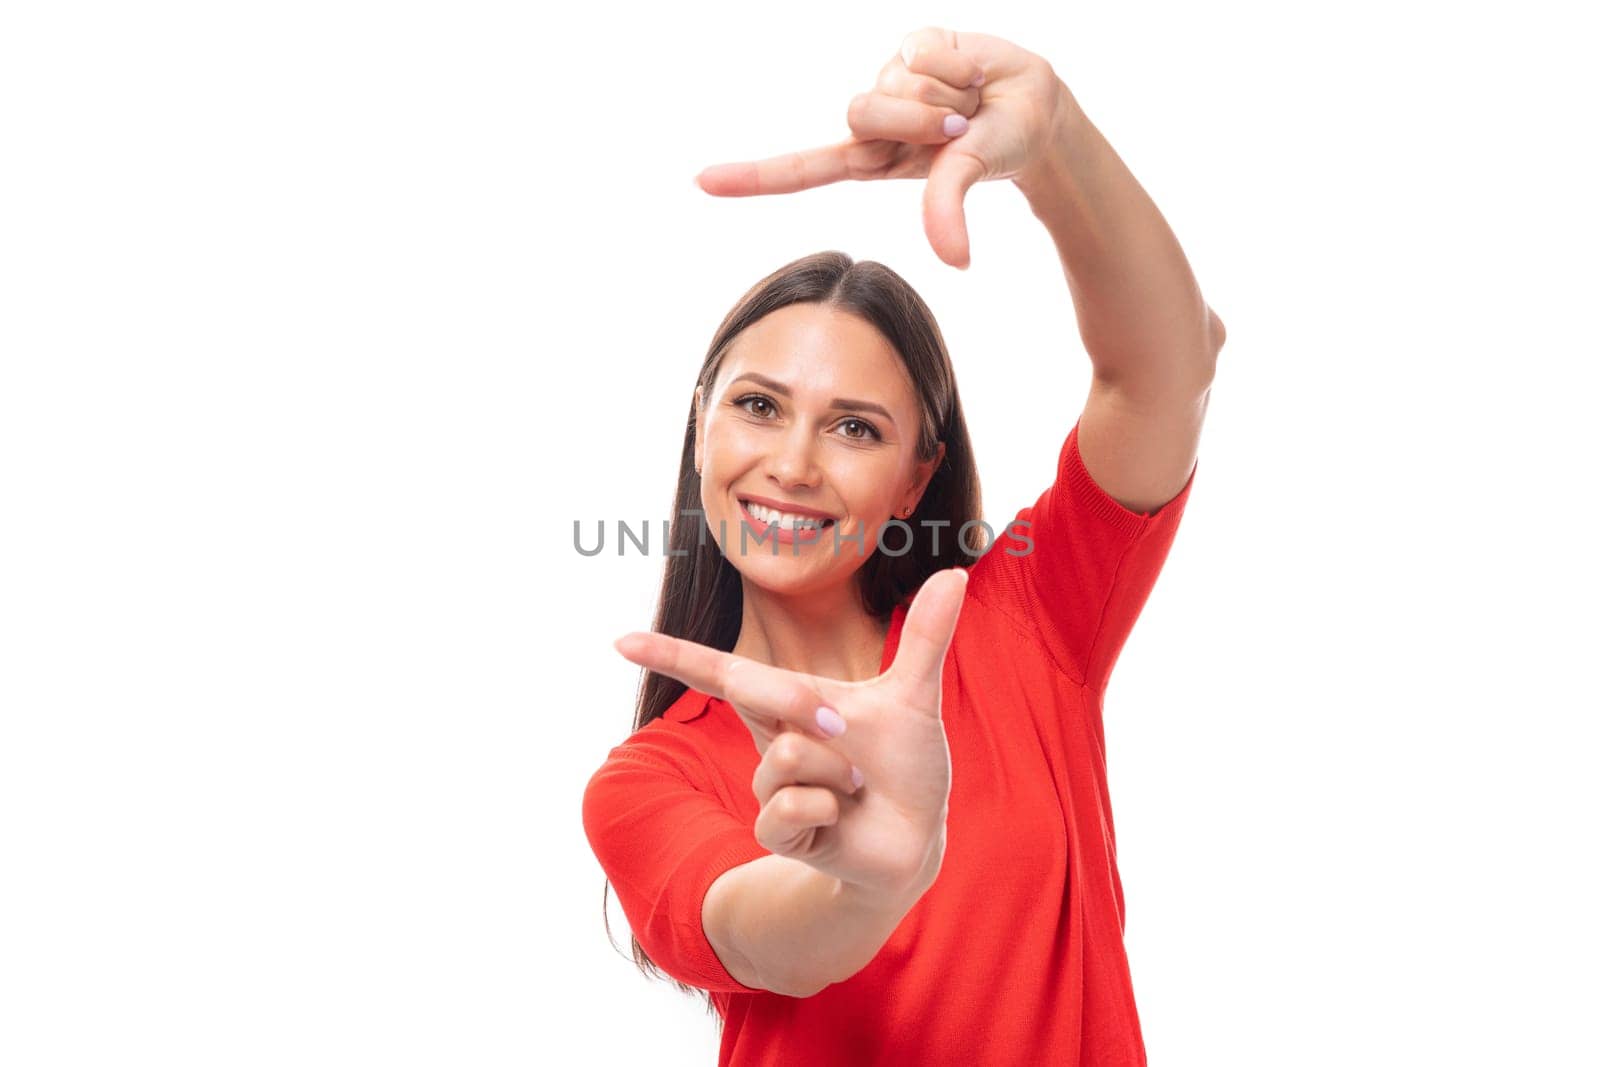 30 year old active Caucasian woman with straight dark hair dressed in red short sleeve shirt smiling on white background.